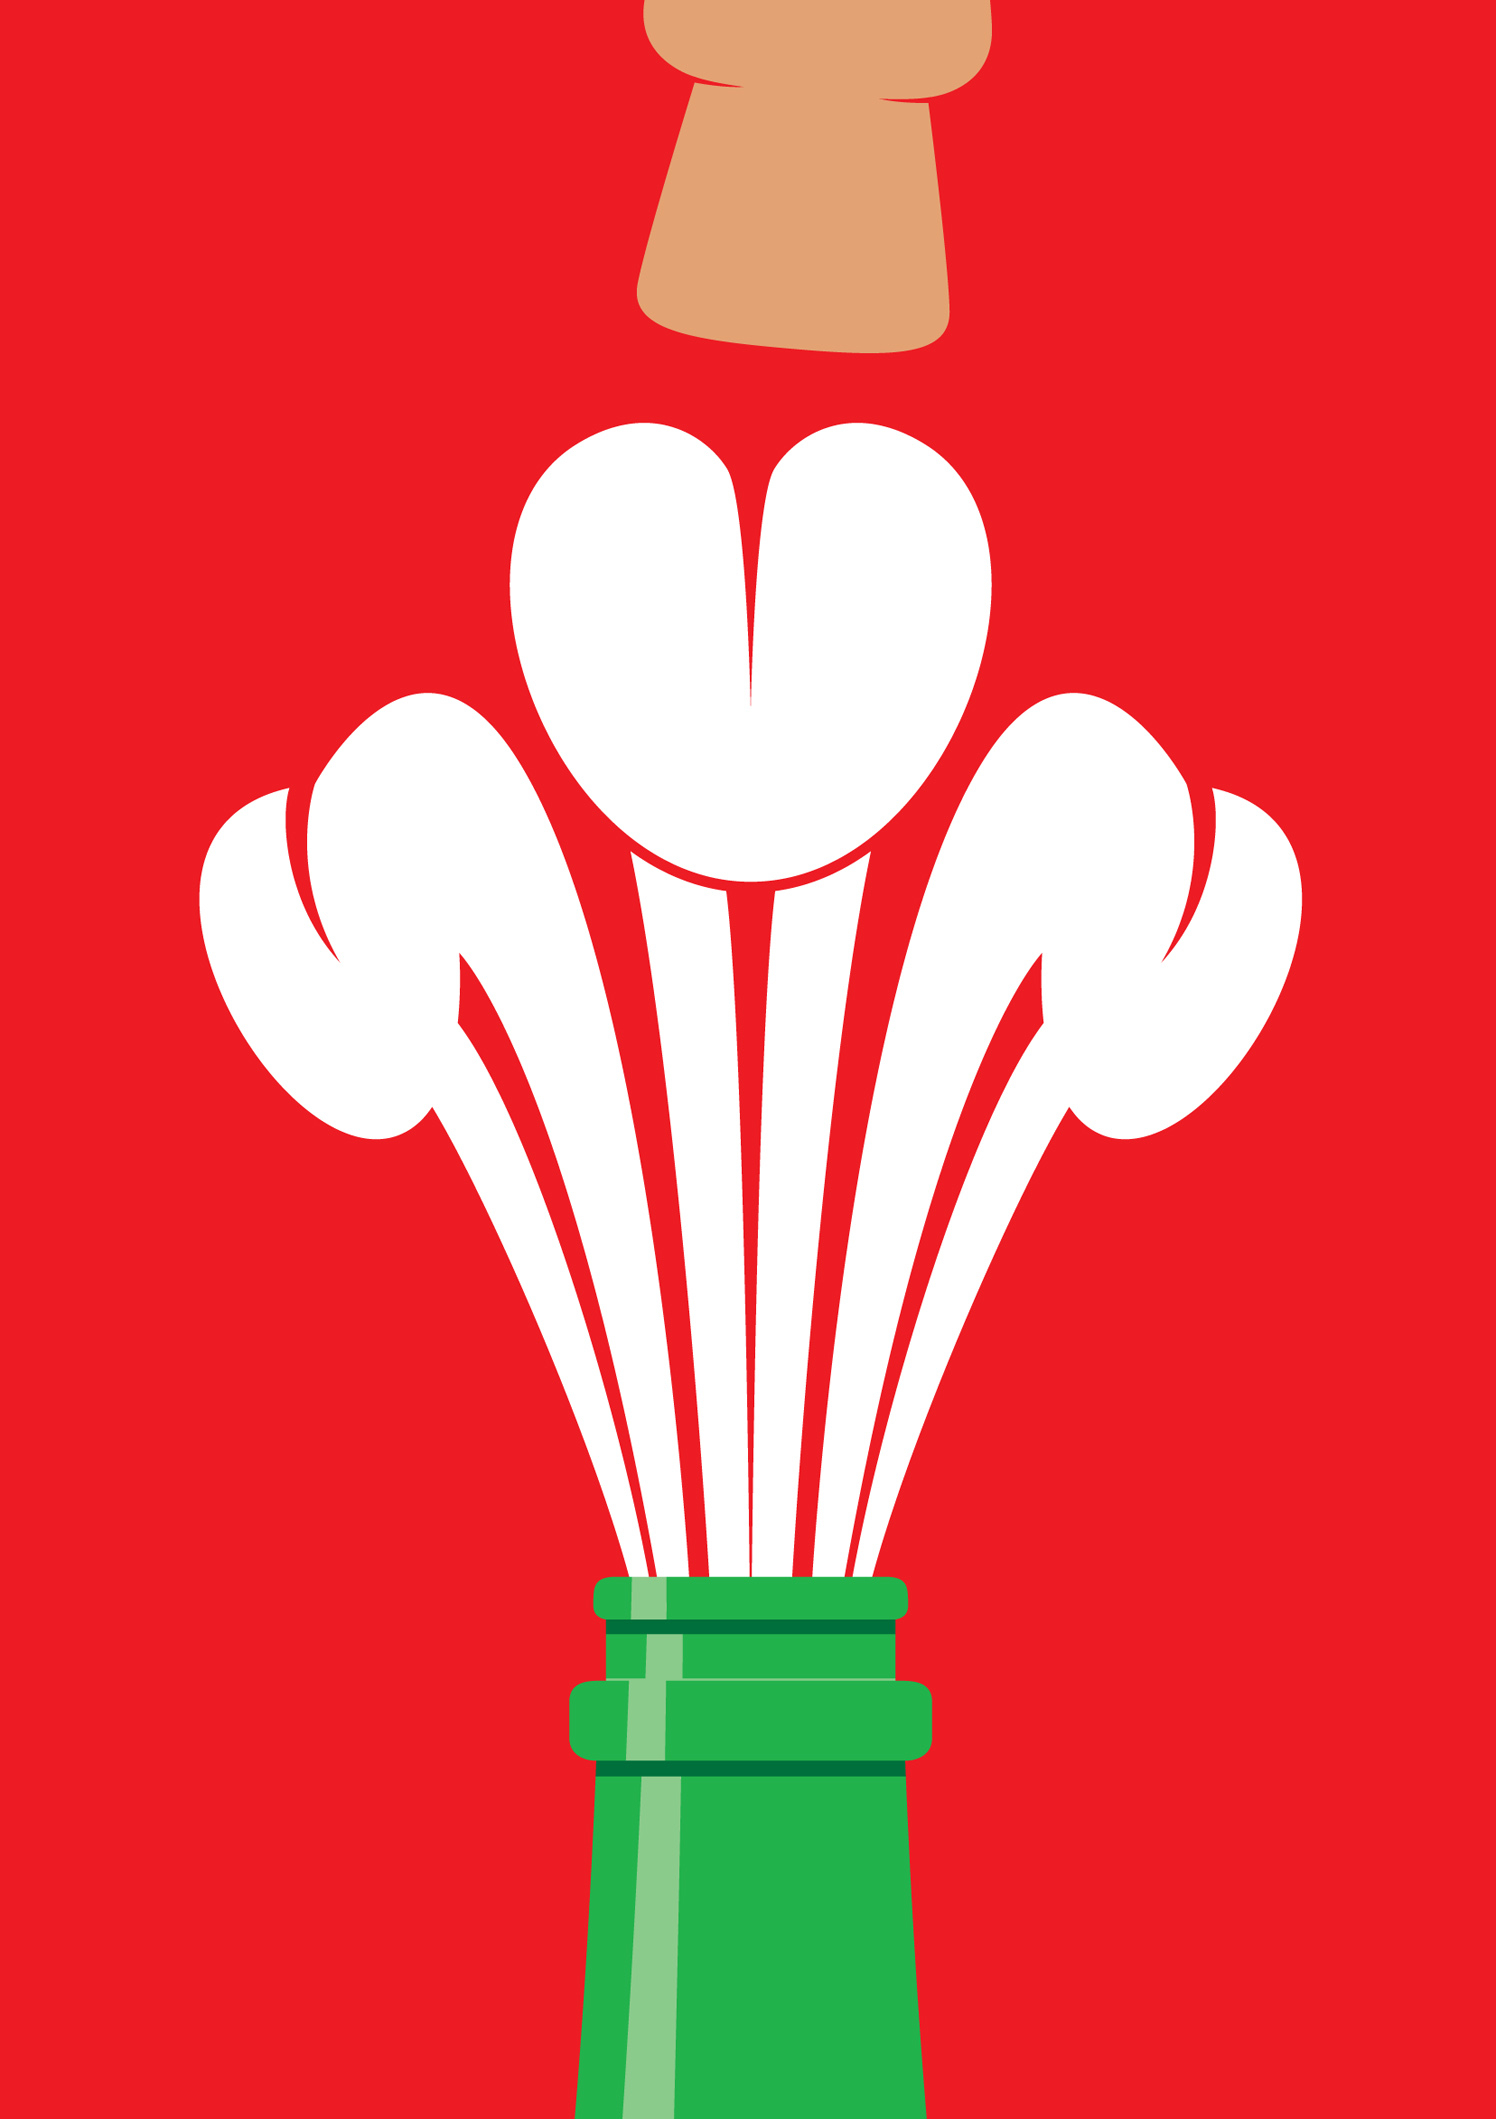 Welsh Rugby / The Big Issue